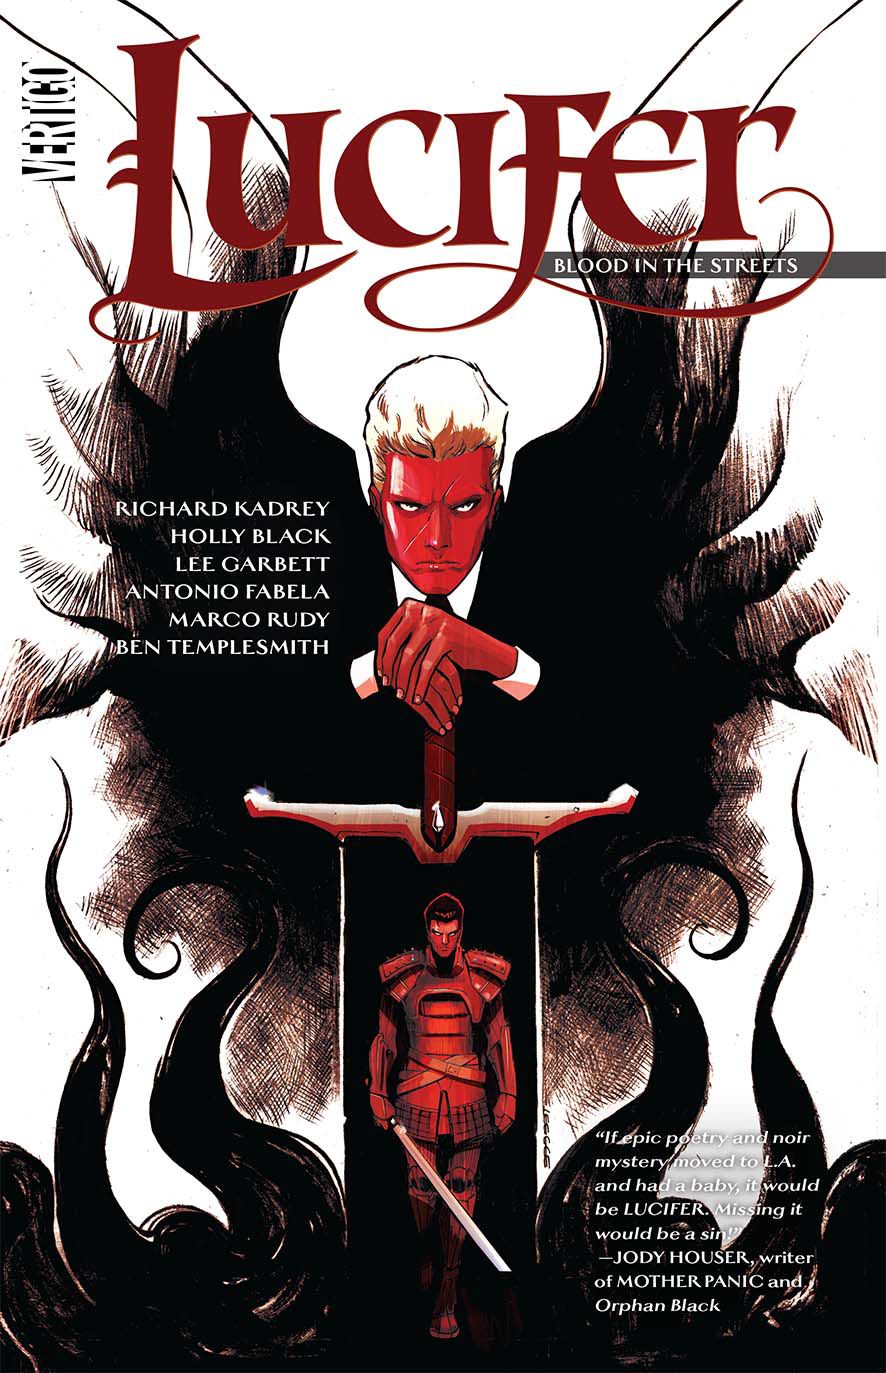 Lucifer (2015) TP VOL 03 Blood In the Streets